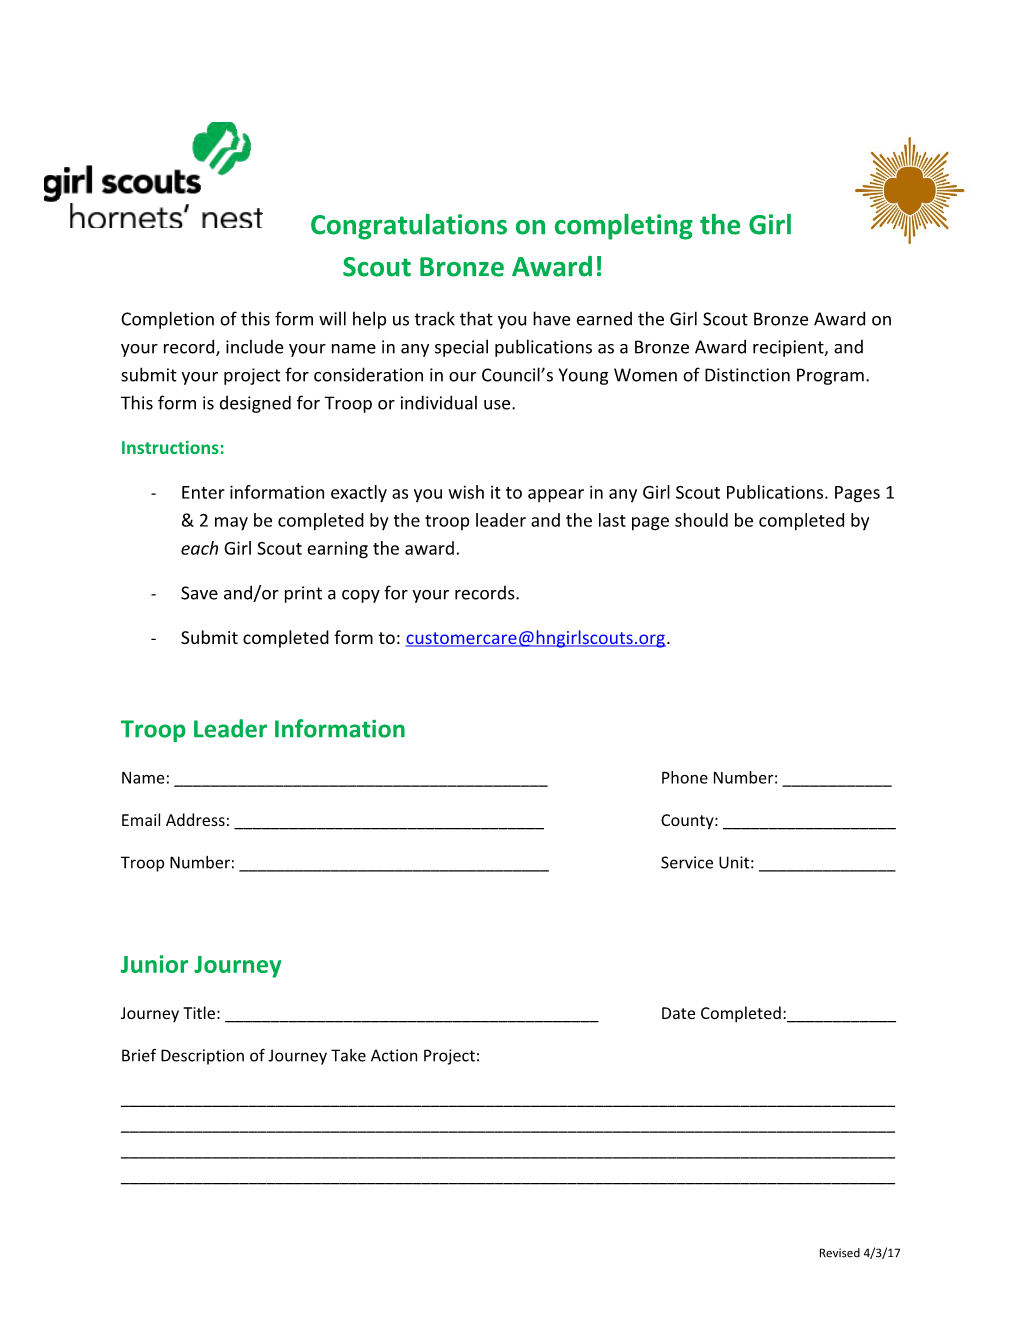 Congratulations on Completing the Girl Scout Bronze Award!